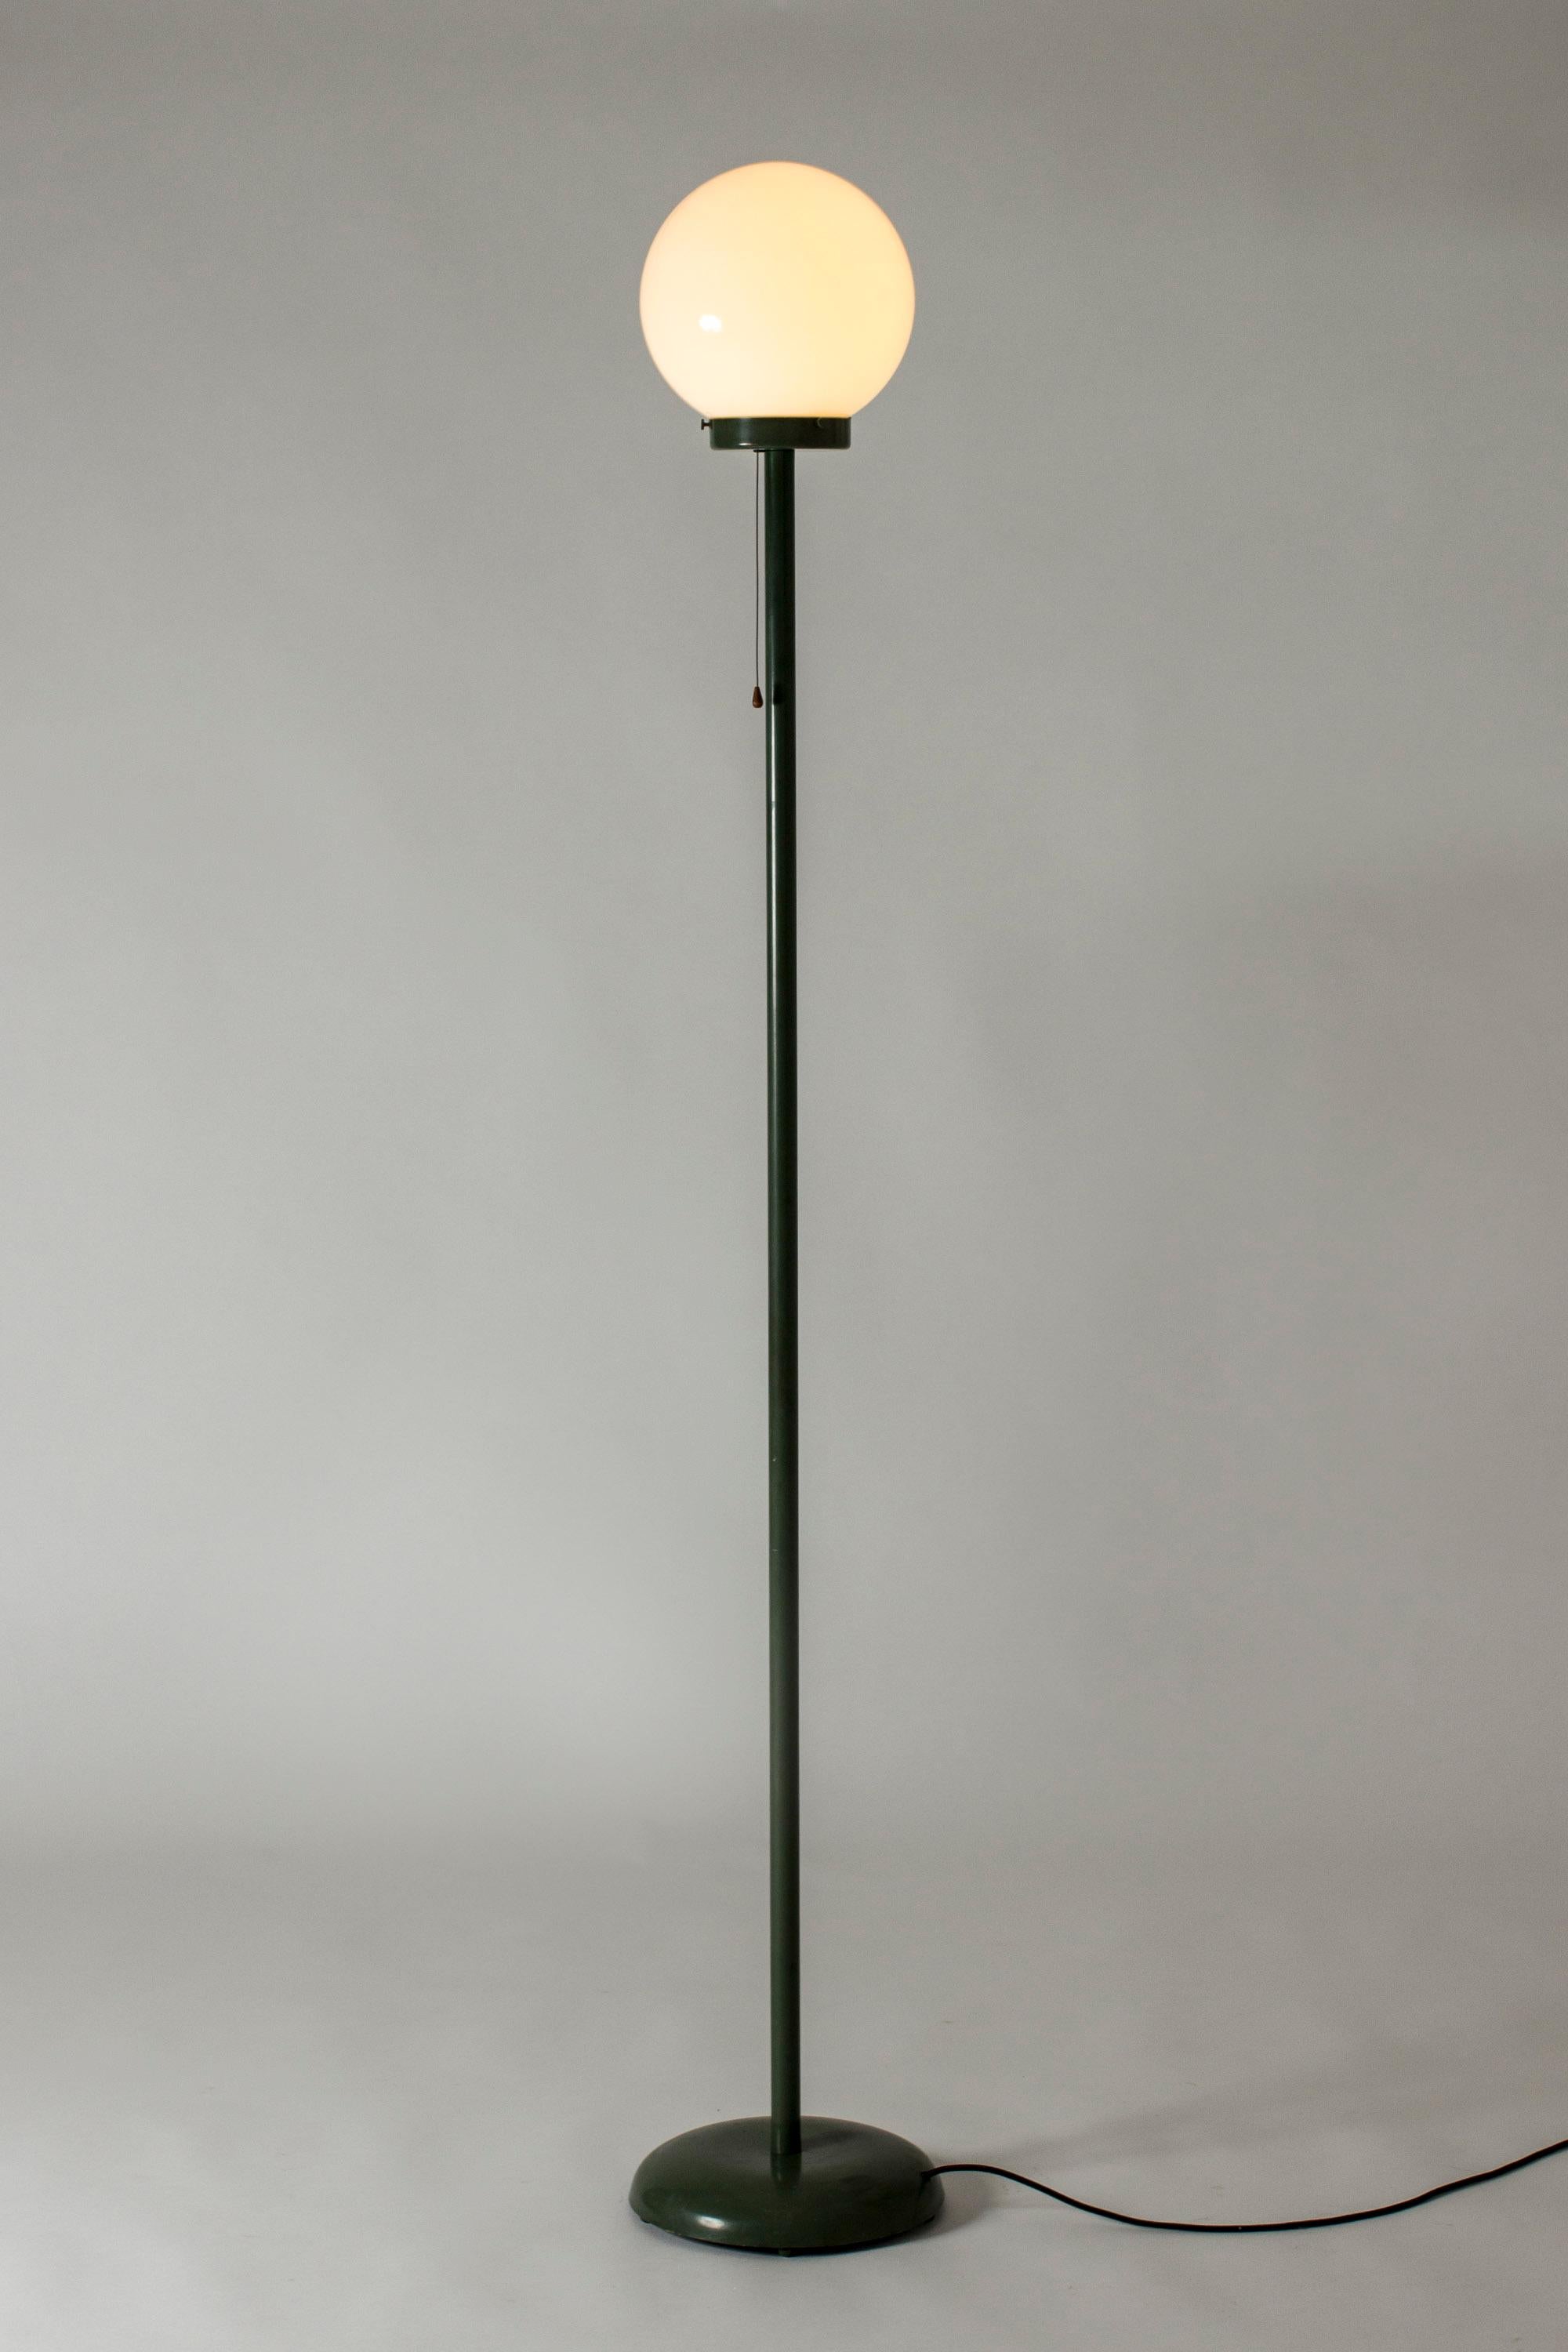 Cool functionalist floor lamp, in a very tall size. Made from lacquered green metal, round glass shade. Very nice proportions. Looks great in a room with a high ceiling.